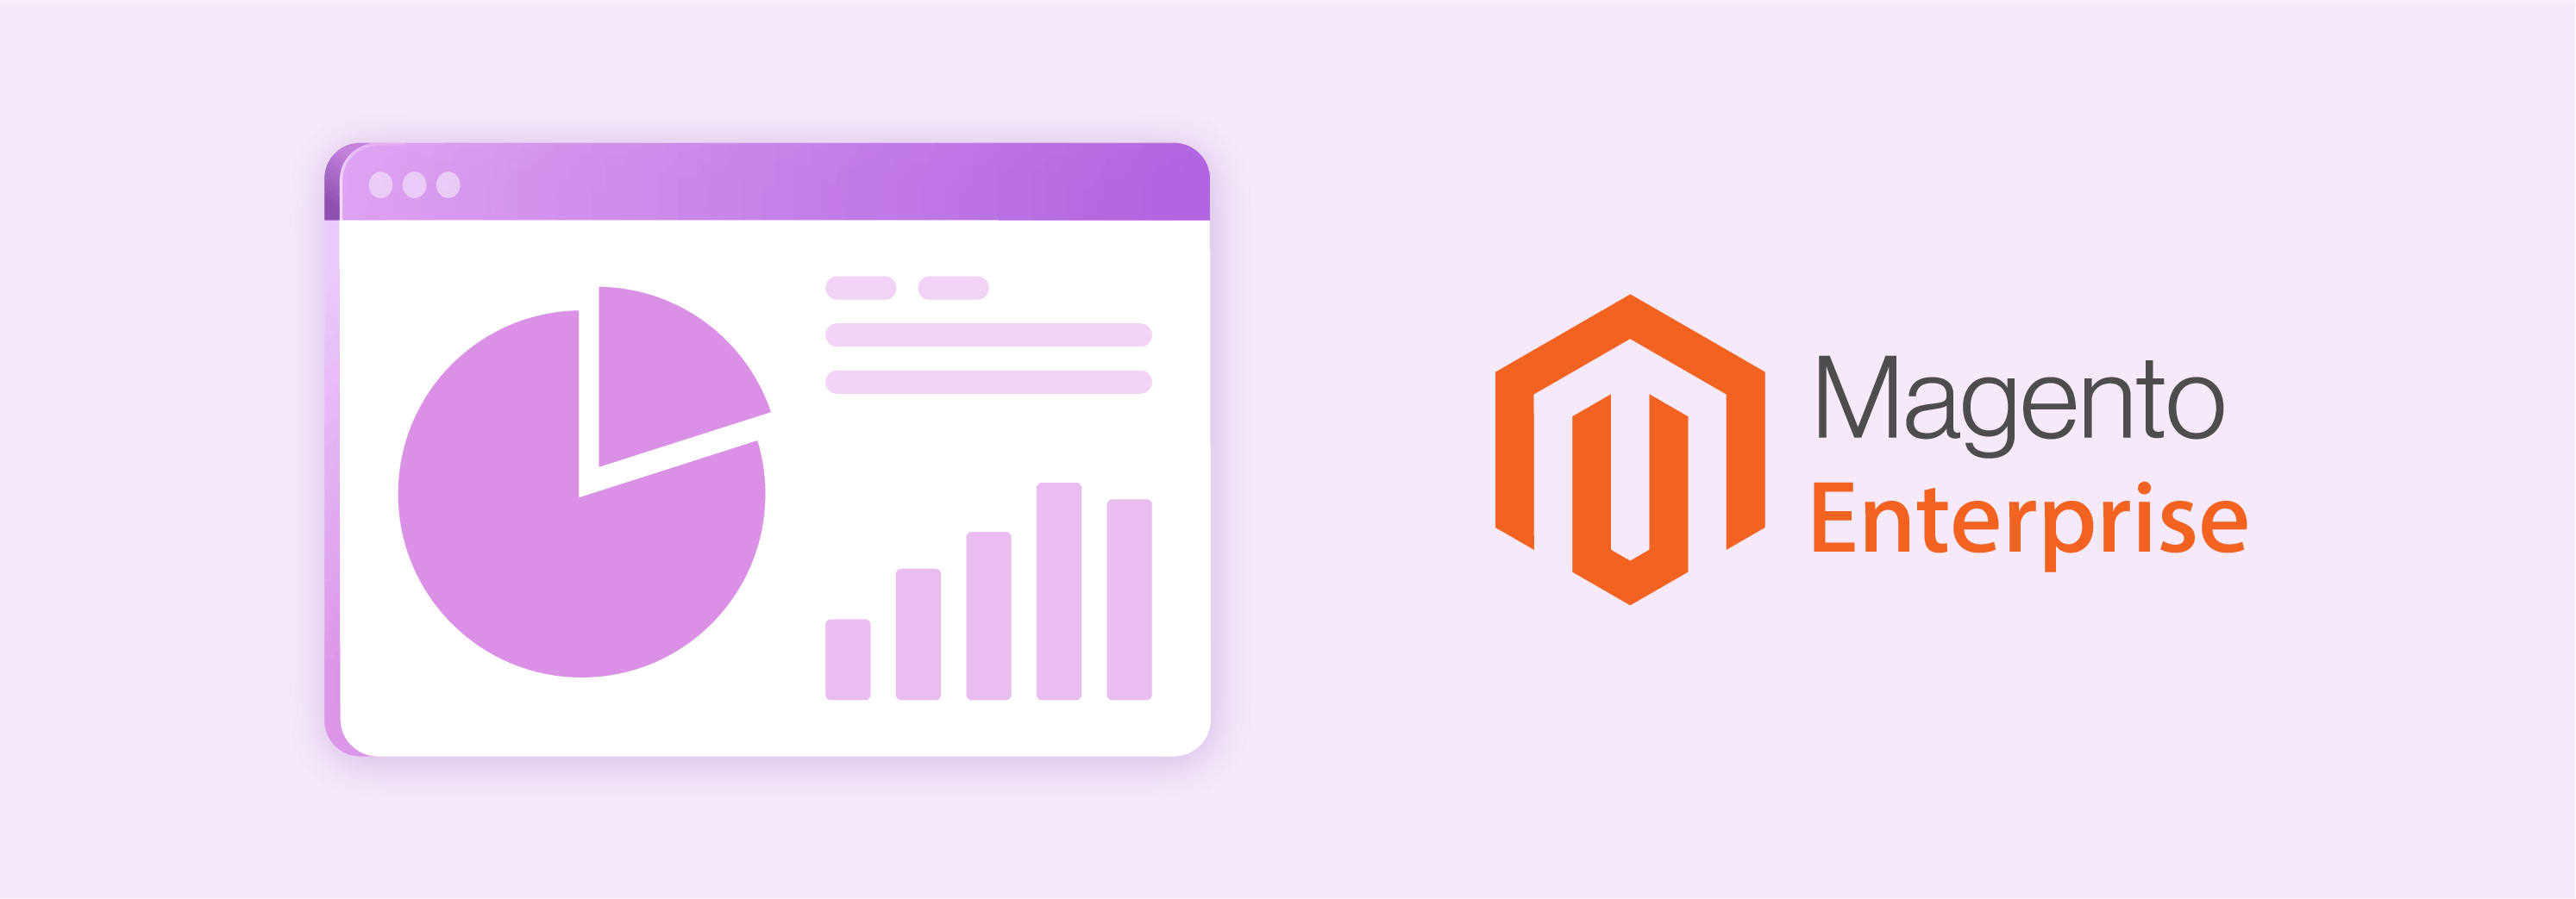 Overview of Magento 2 Enterprise Version by Adobe for large-scale businesses